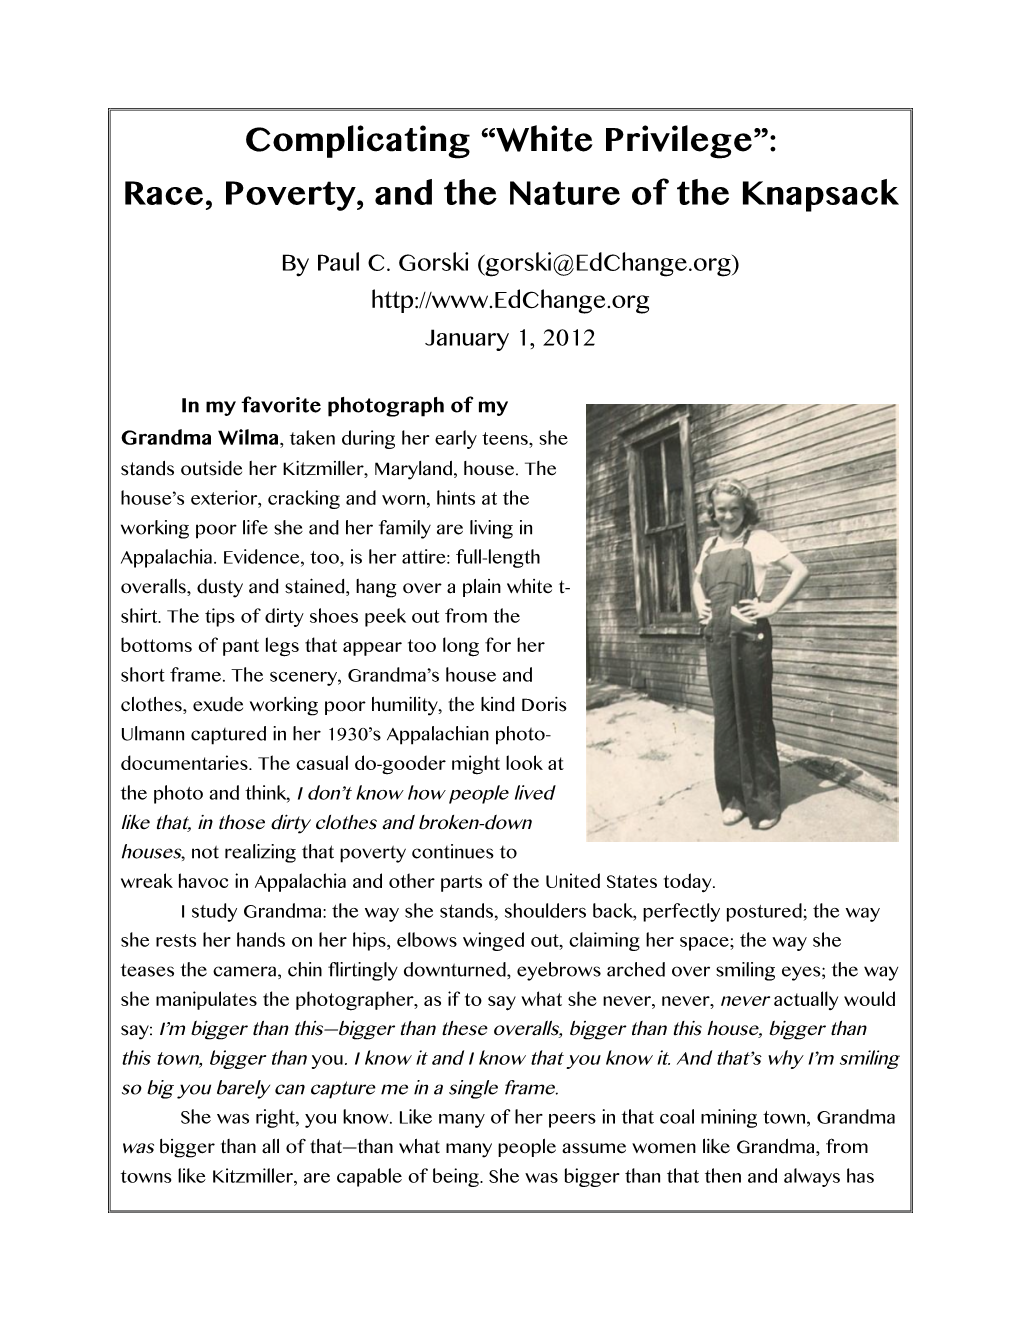 Complicating “White Privilege”: Race, Poverty, and the Nature of the Knapsack